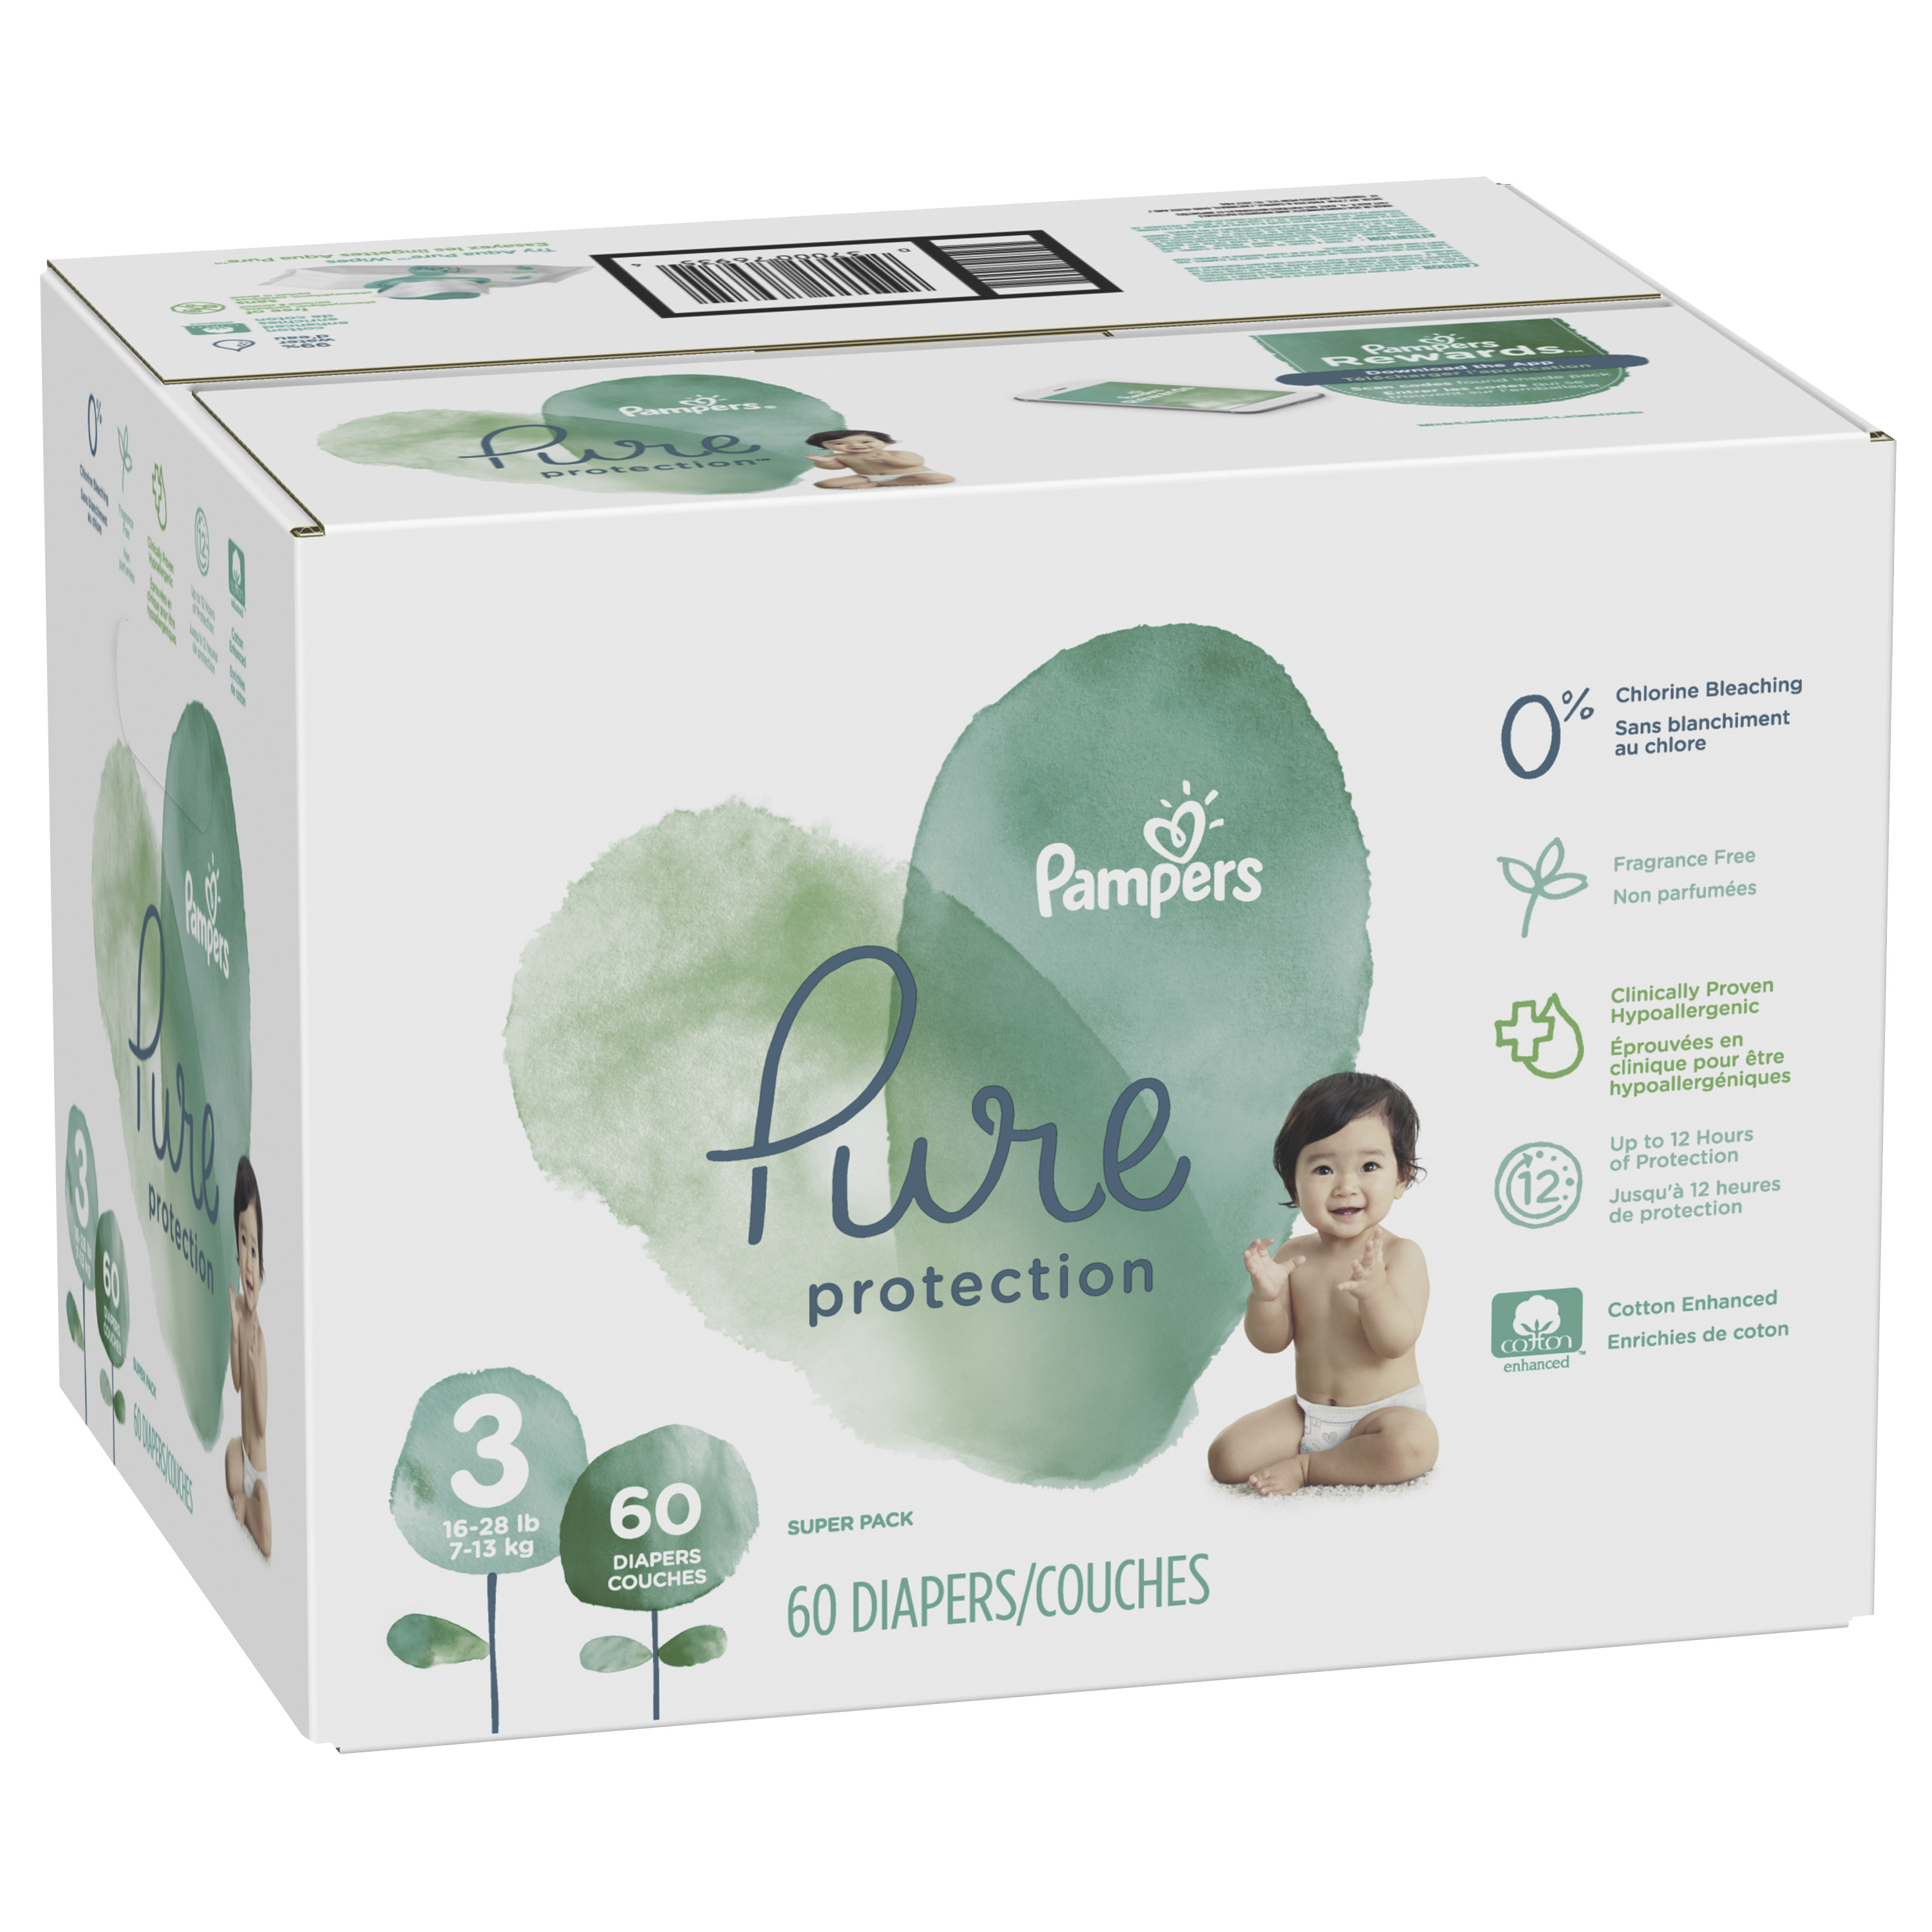 Pampers Pure Protection Natural Diapers, Size 3, 60 ct - image 12 of 13